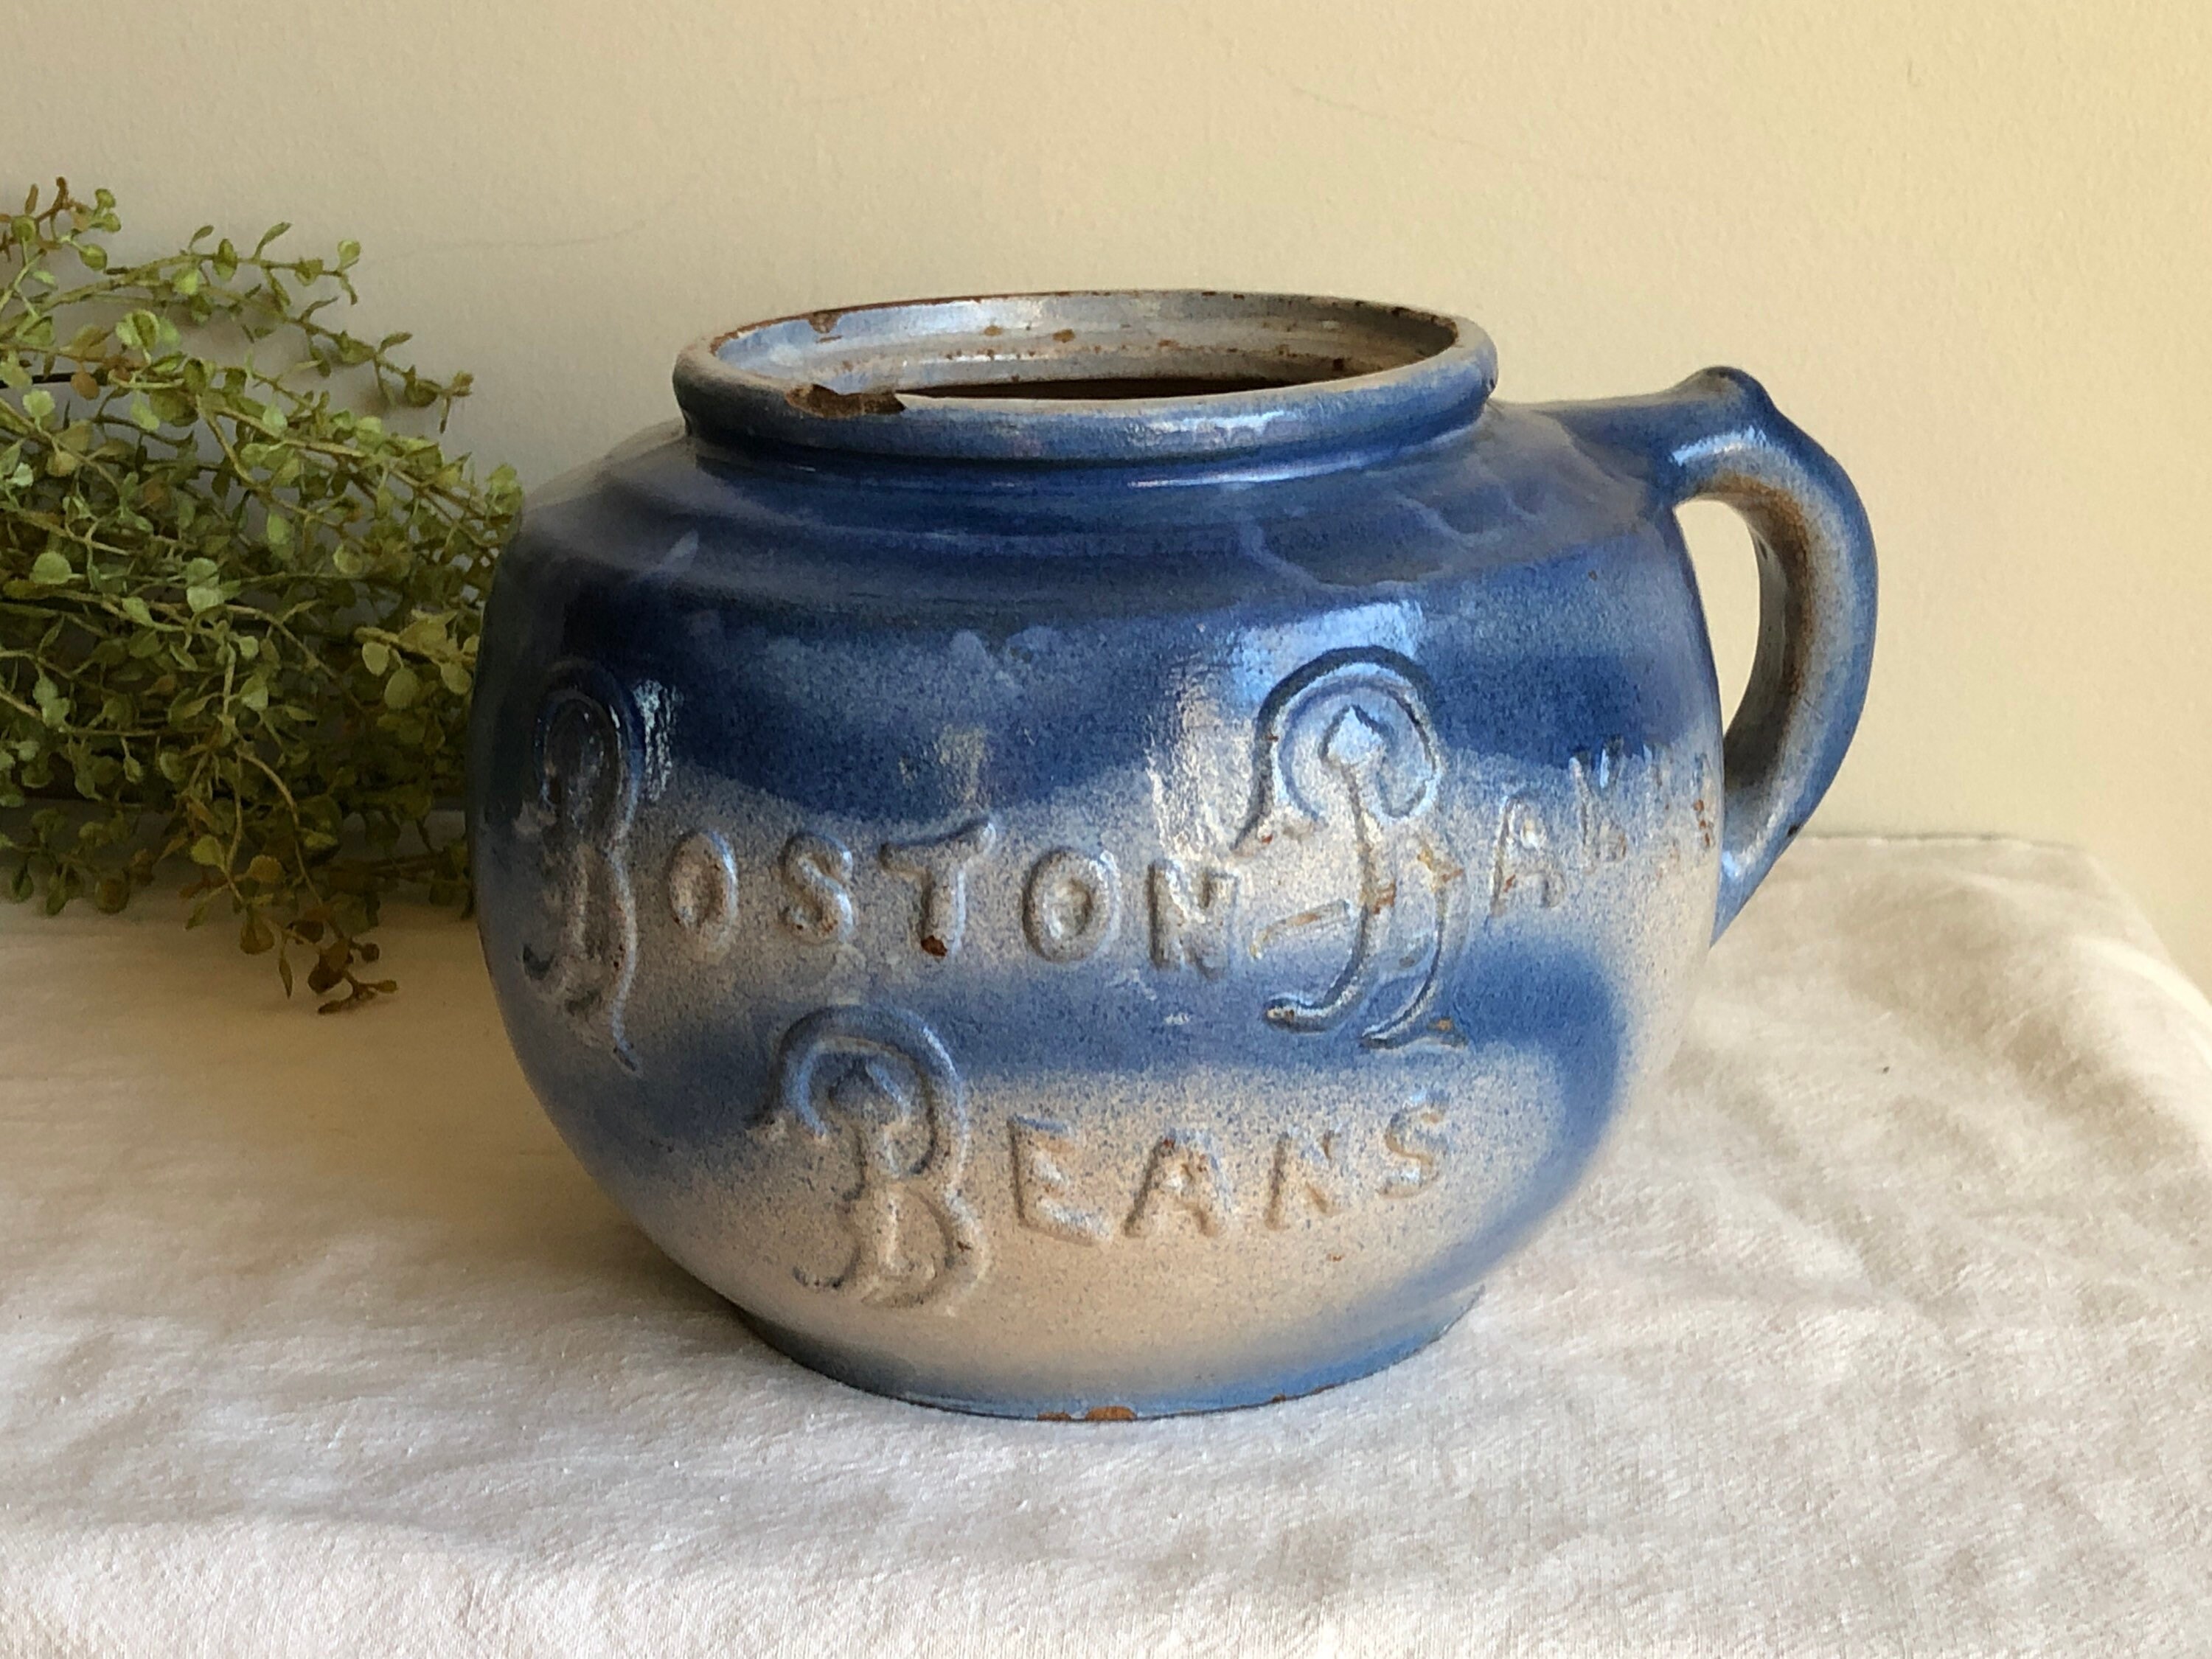 Antique American Stoneware 2 Quart Size Bean Pot - Baked Beans Cooking Pot  Circa Early 20th Century